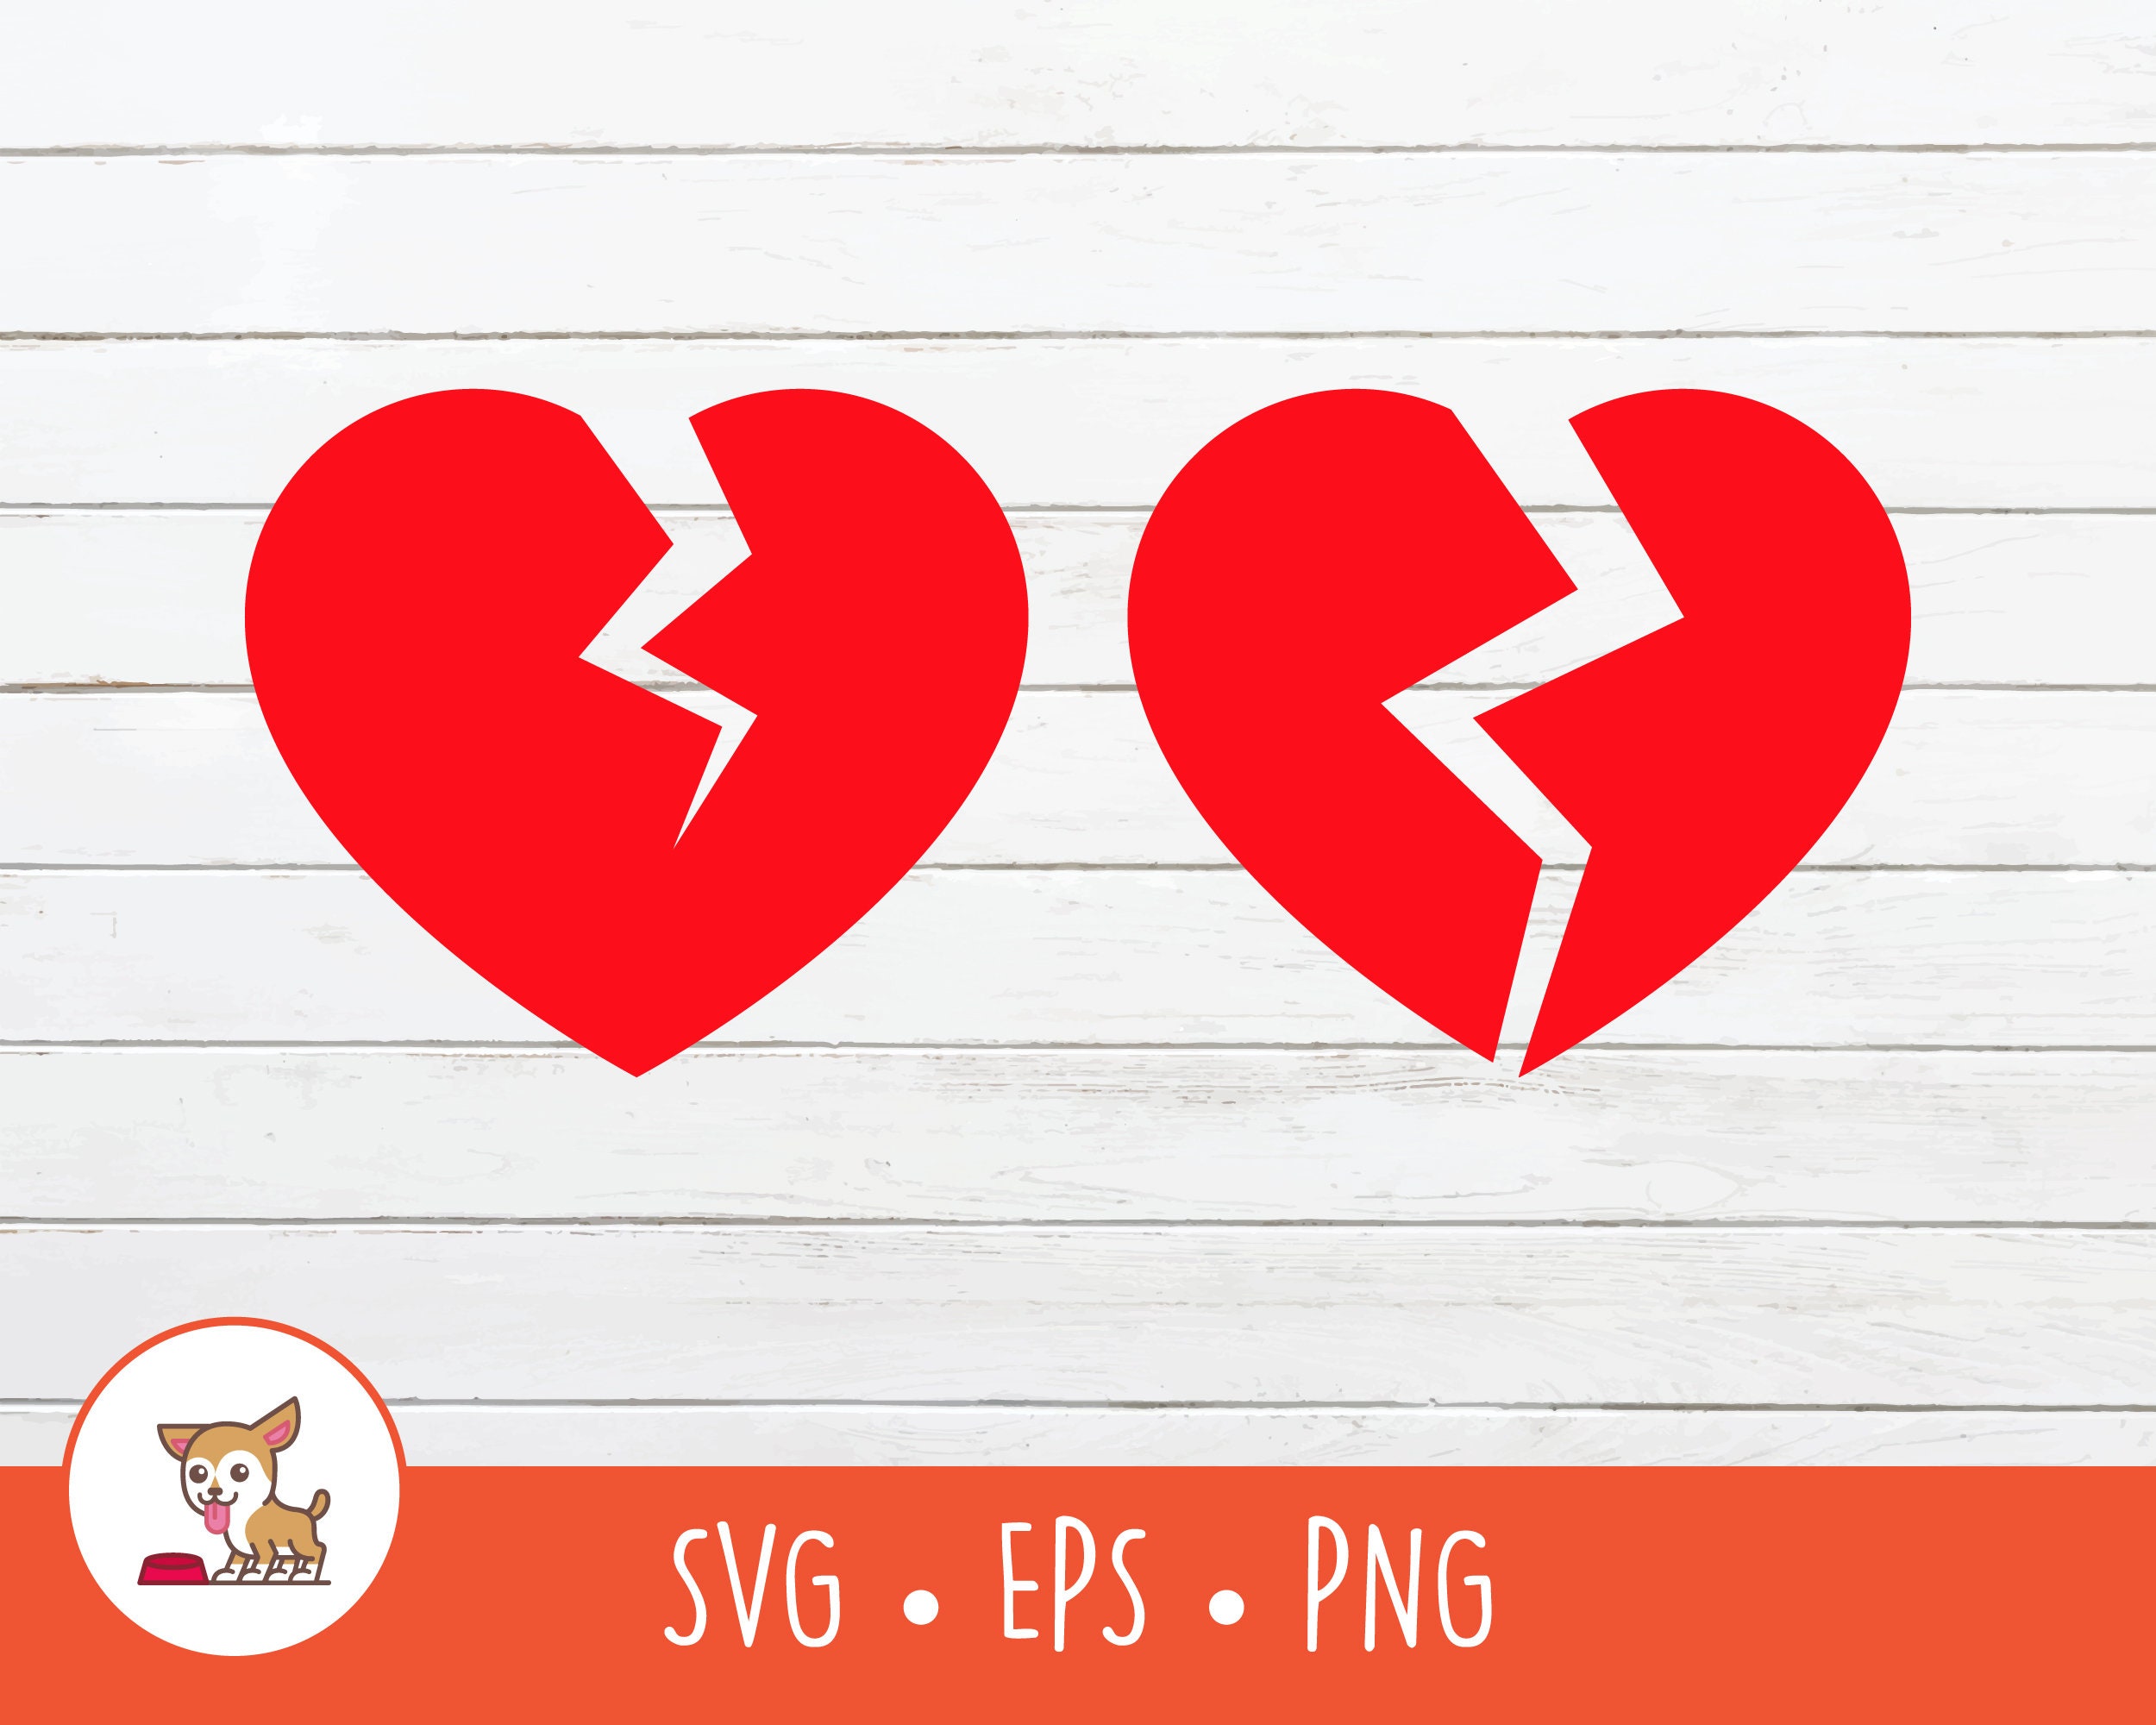 Broken Heart SVG, Broken Heart Clipart, Broken Heart Cut File for ...